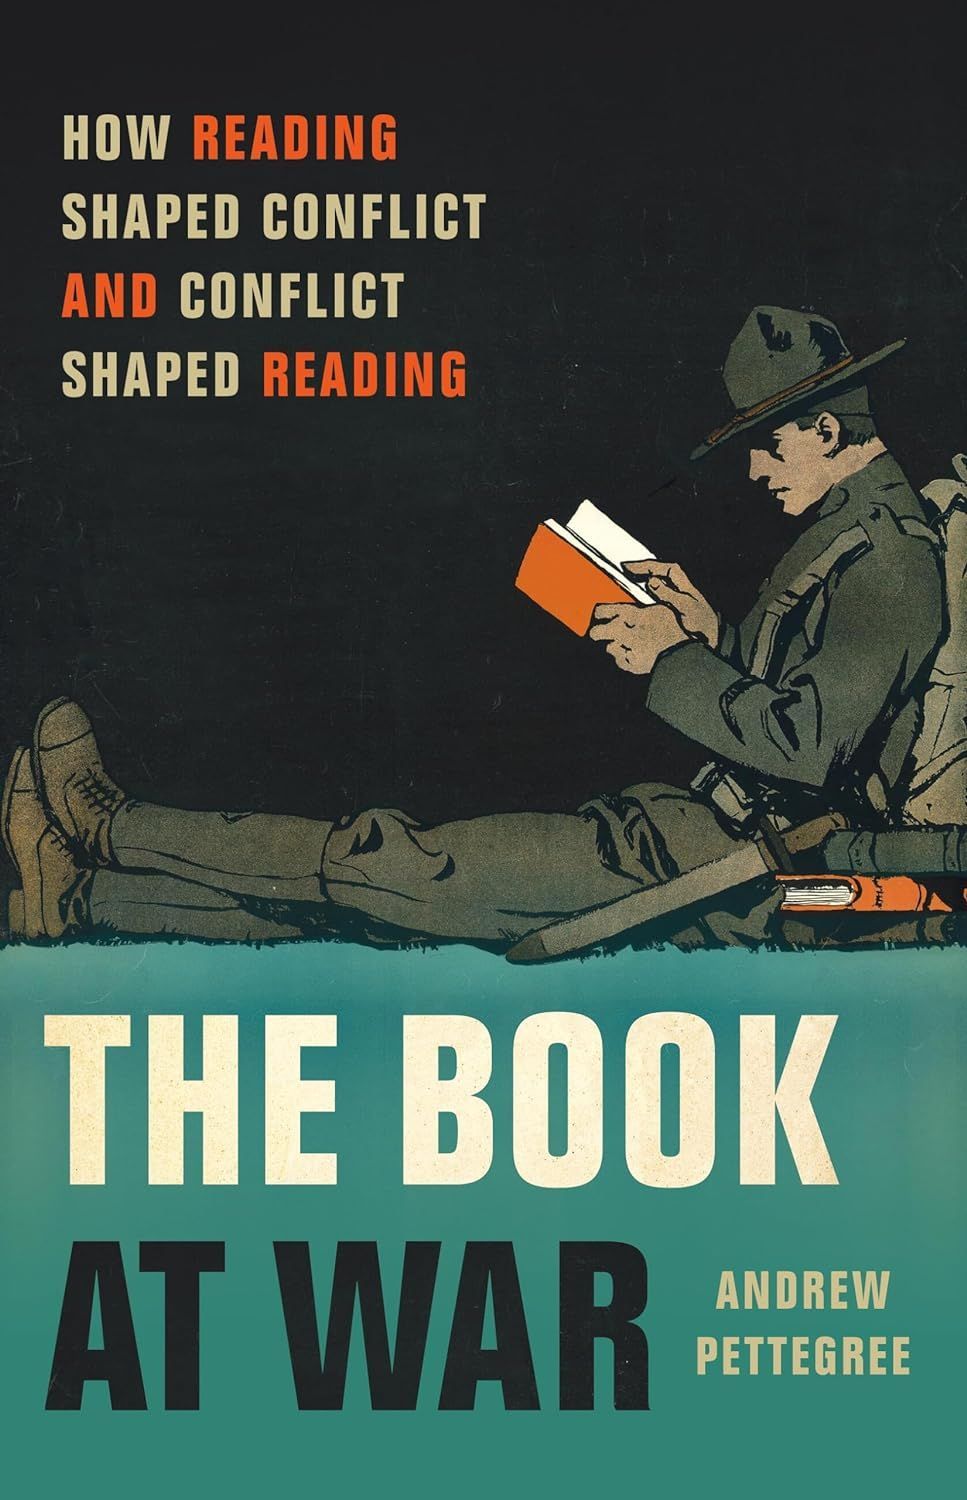 The Pulp of Culture: On Andrew Pettegree’s “The Book at War”